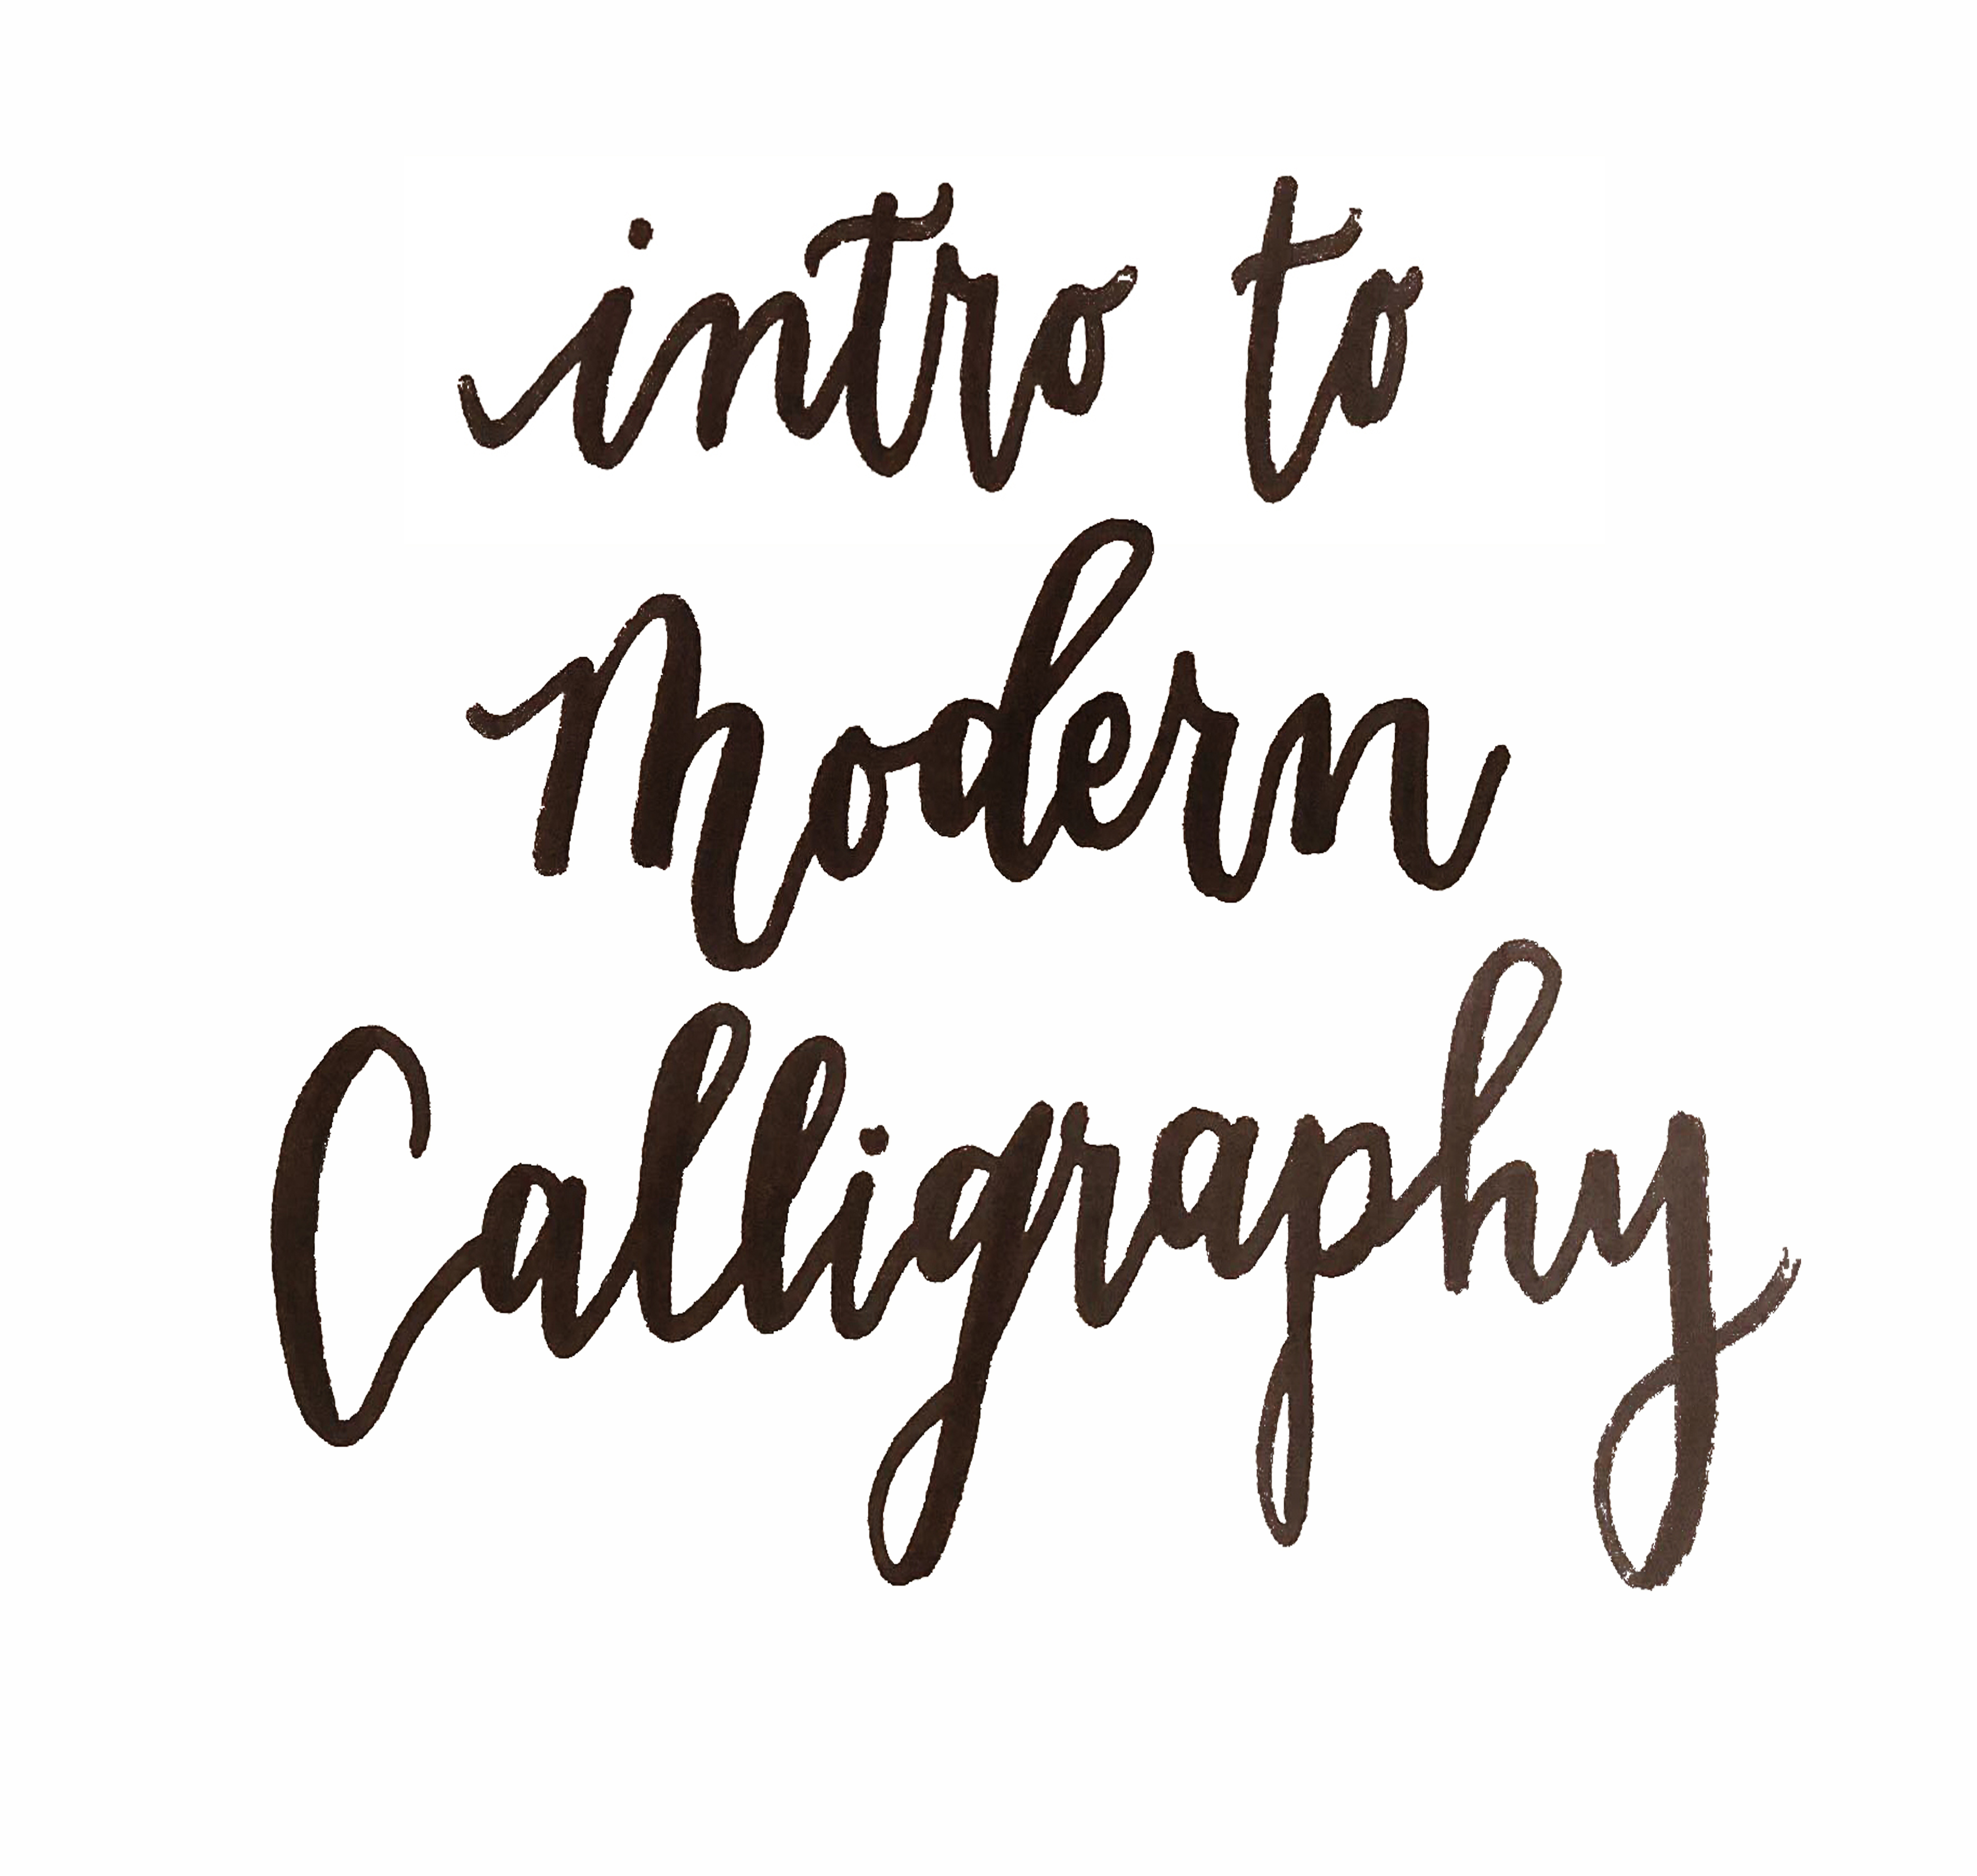 Calligraphy Classes – Willow Oak Center for Arts & Learning